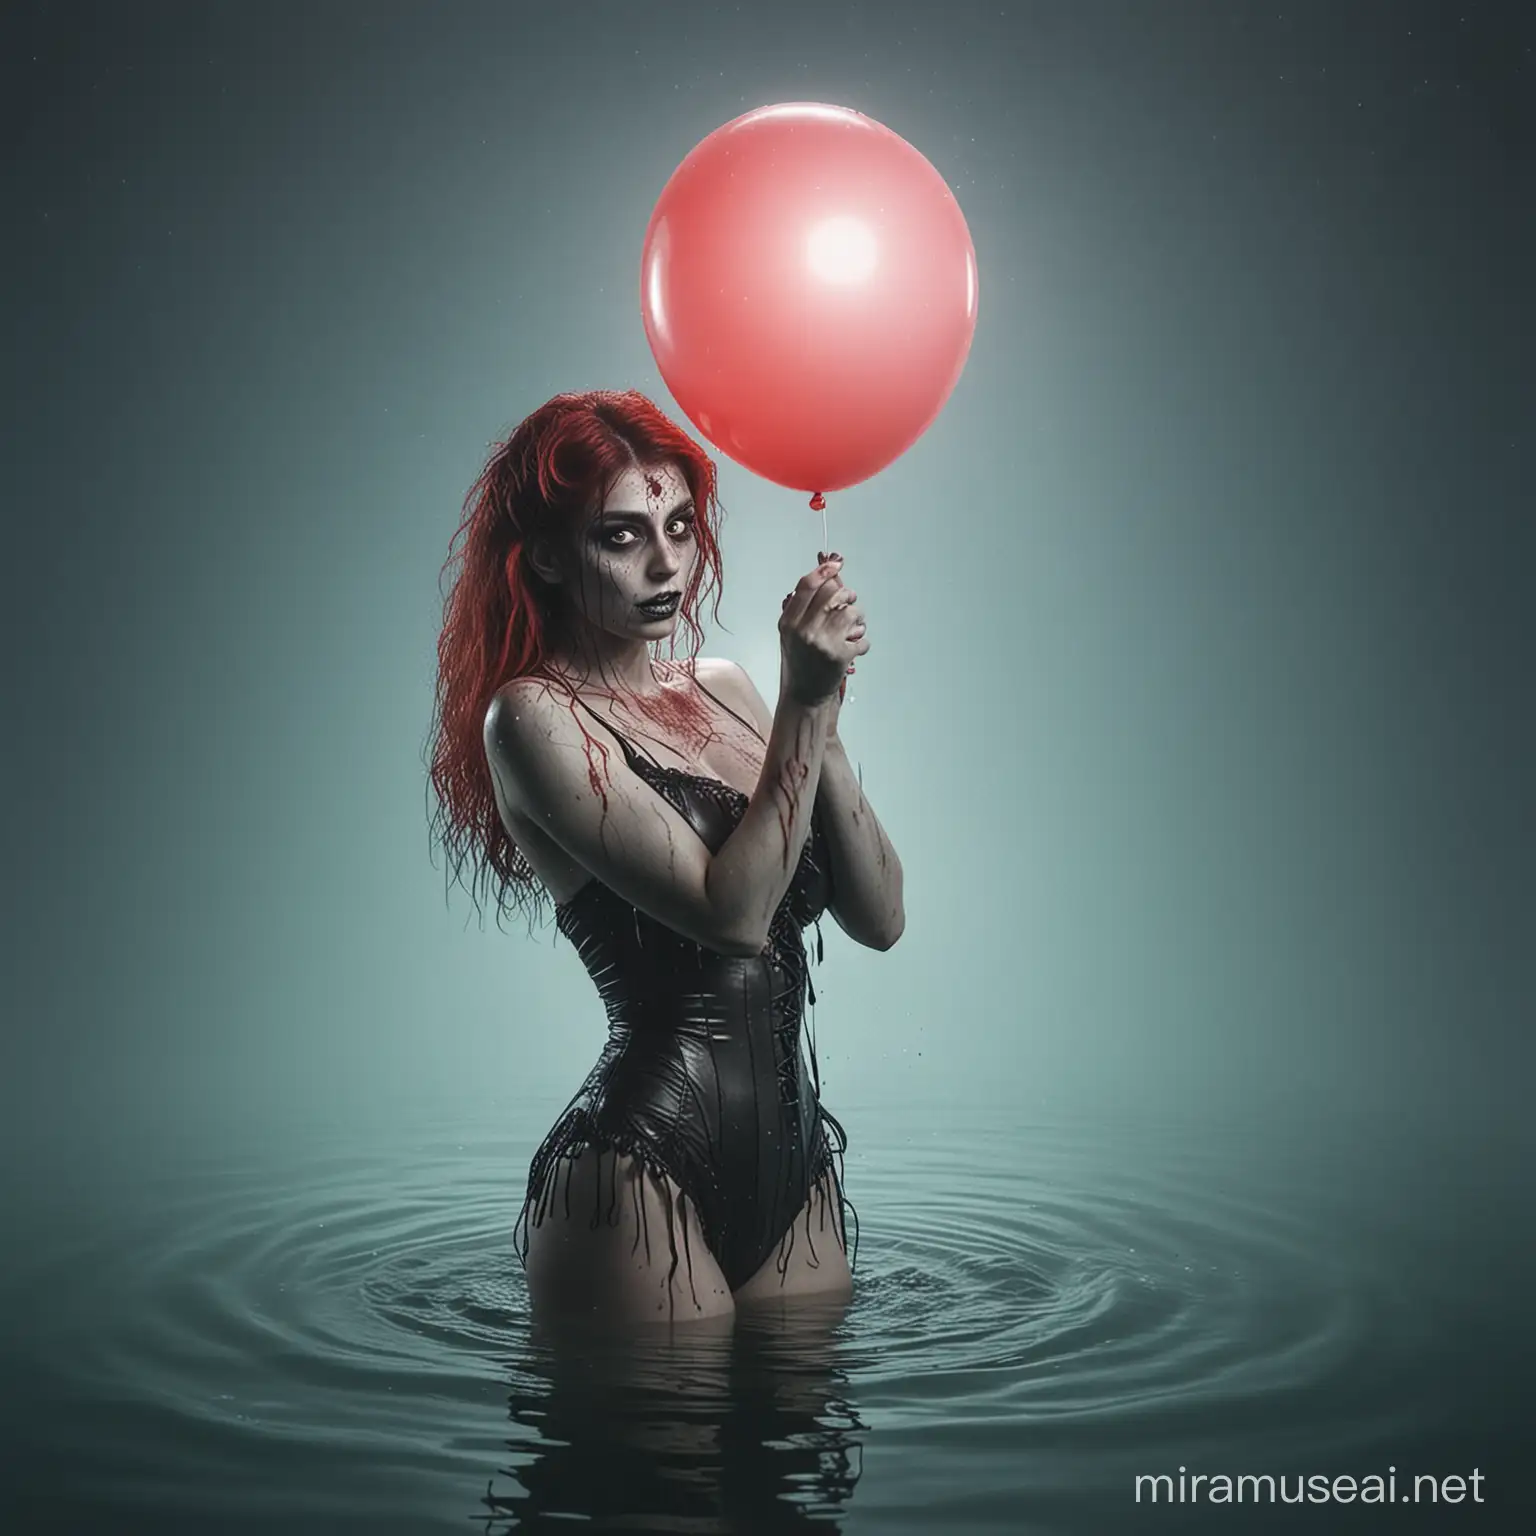 Holding a balloon, beatiful zombie woman, under the water, gradient